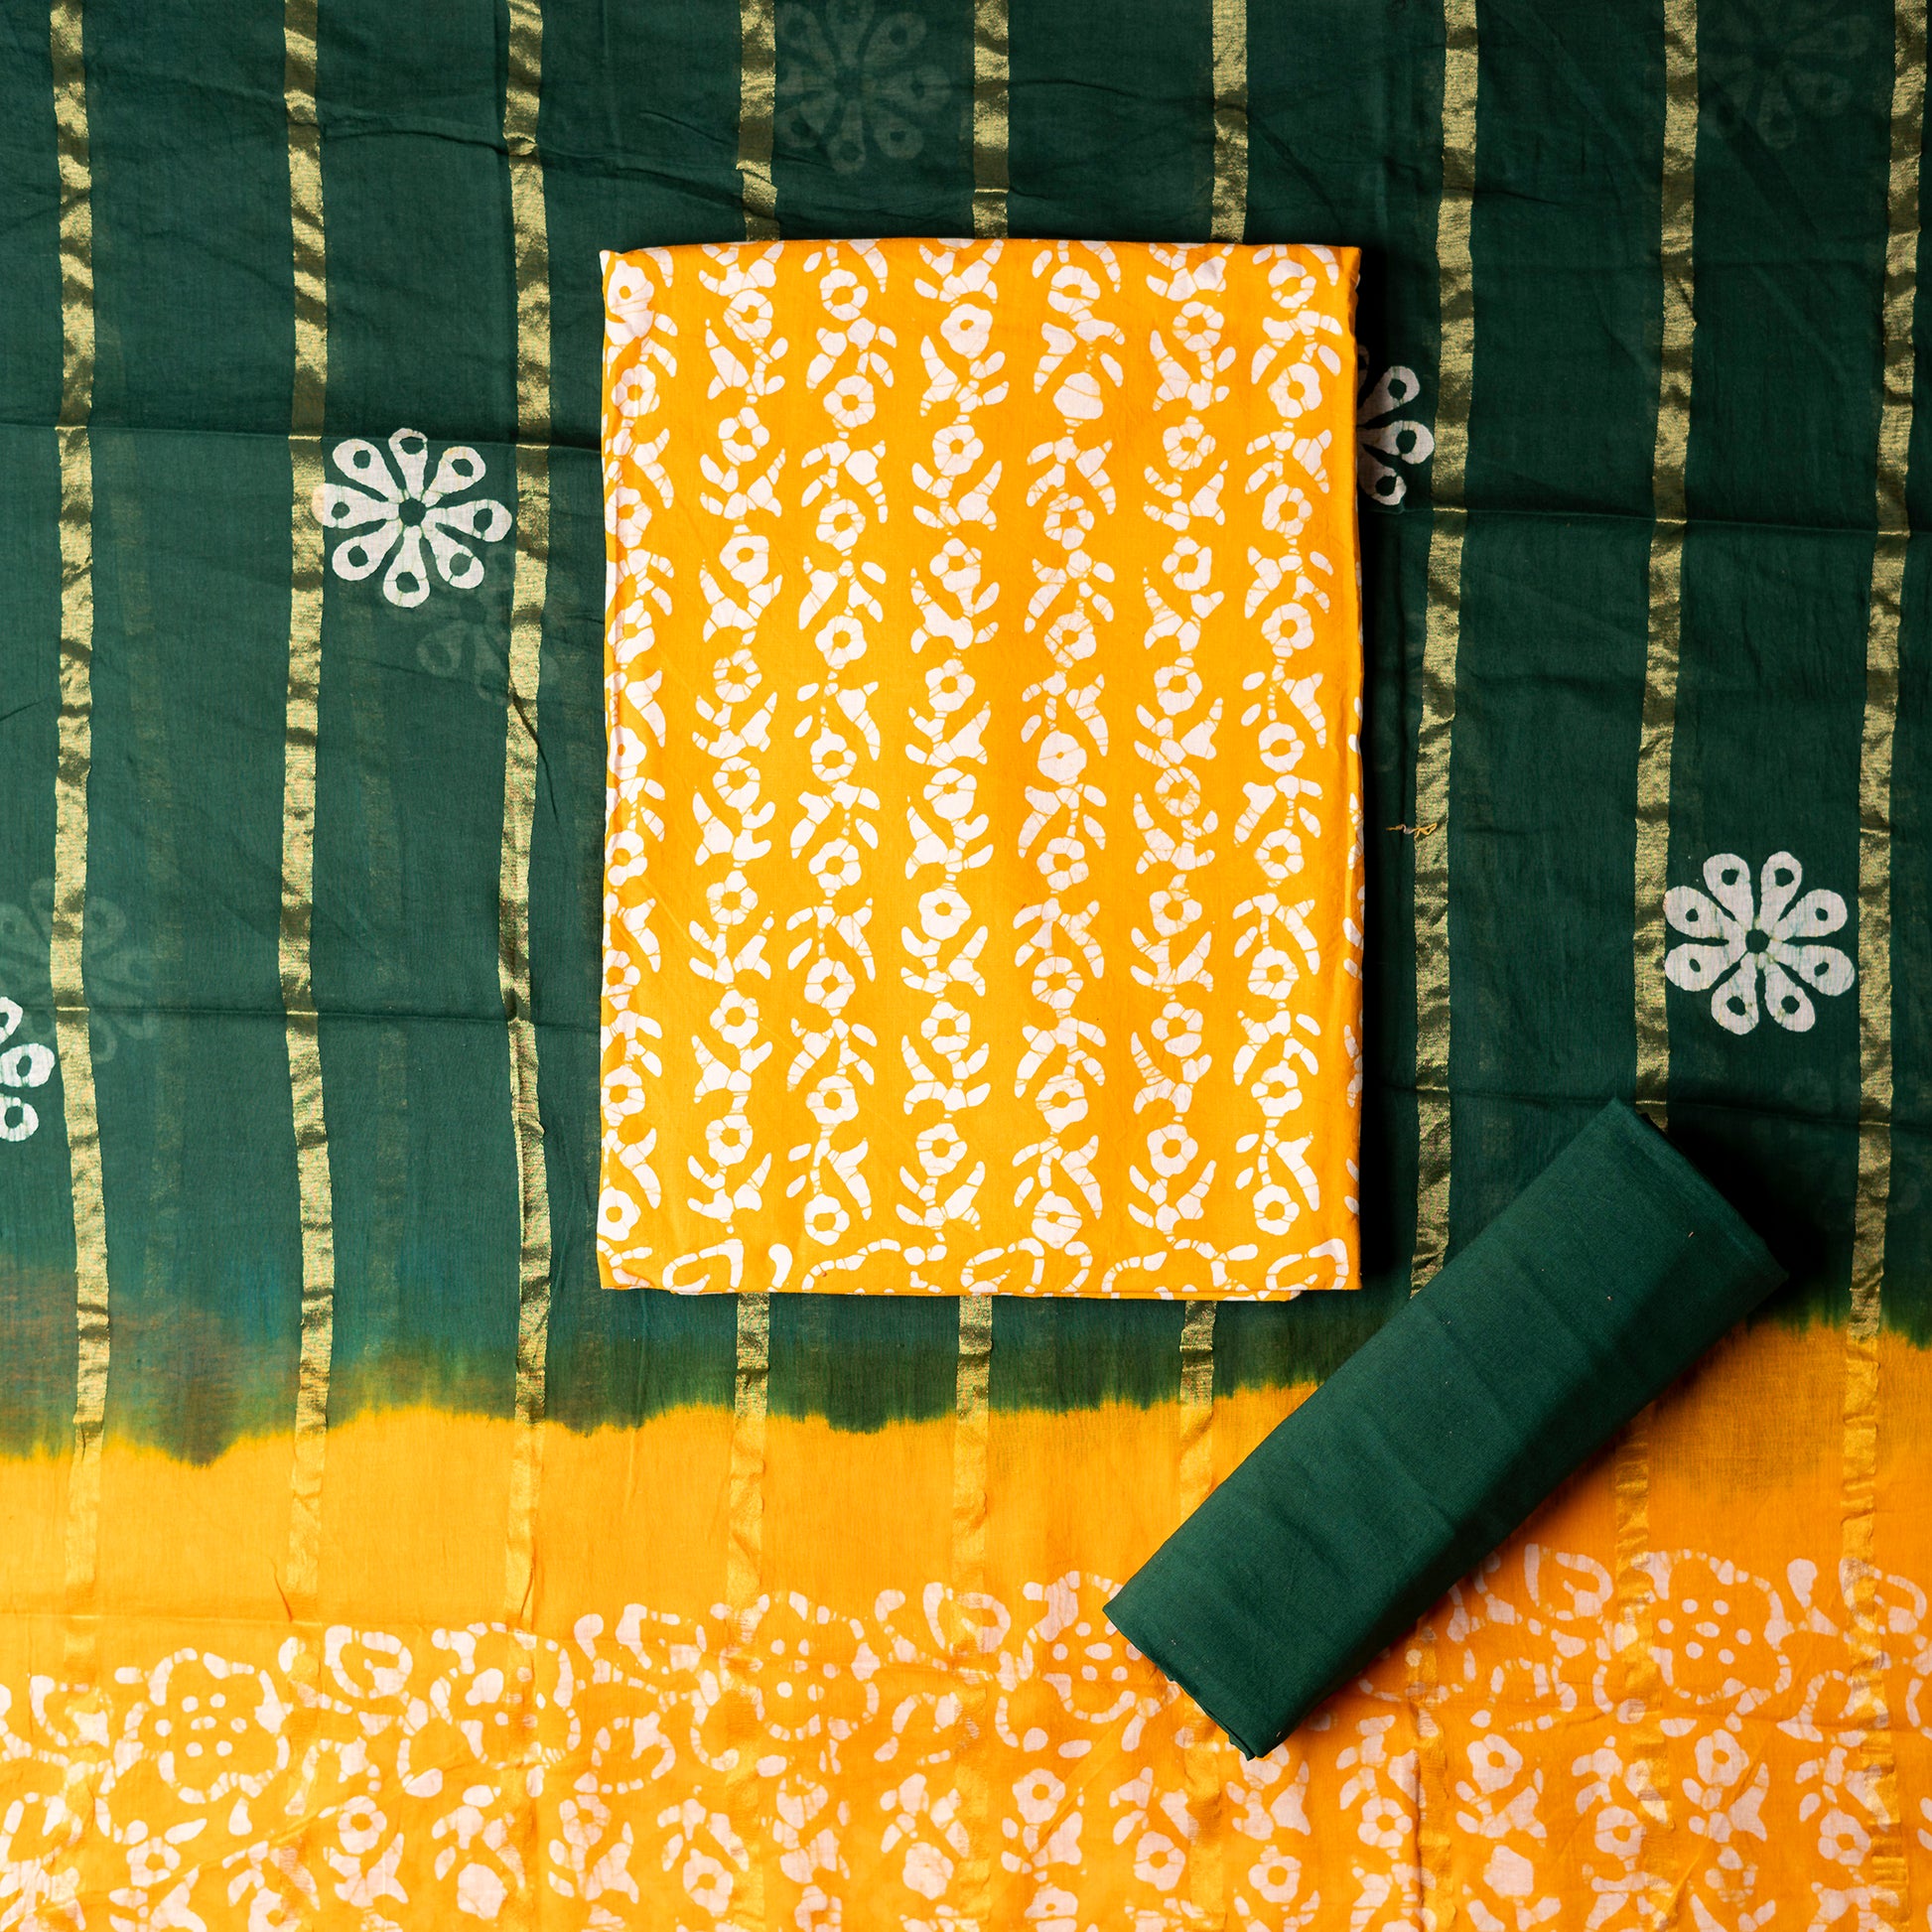 Yellow color cotton wax batik dress material with white prints, cotton green color bottom with batik prints. Cotton green and yellow color dupatta with golden color lines in between and wax batik prints